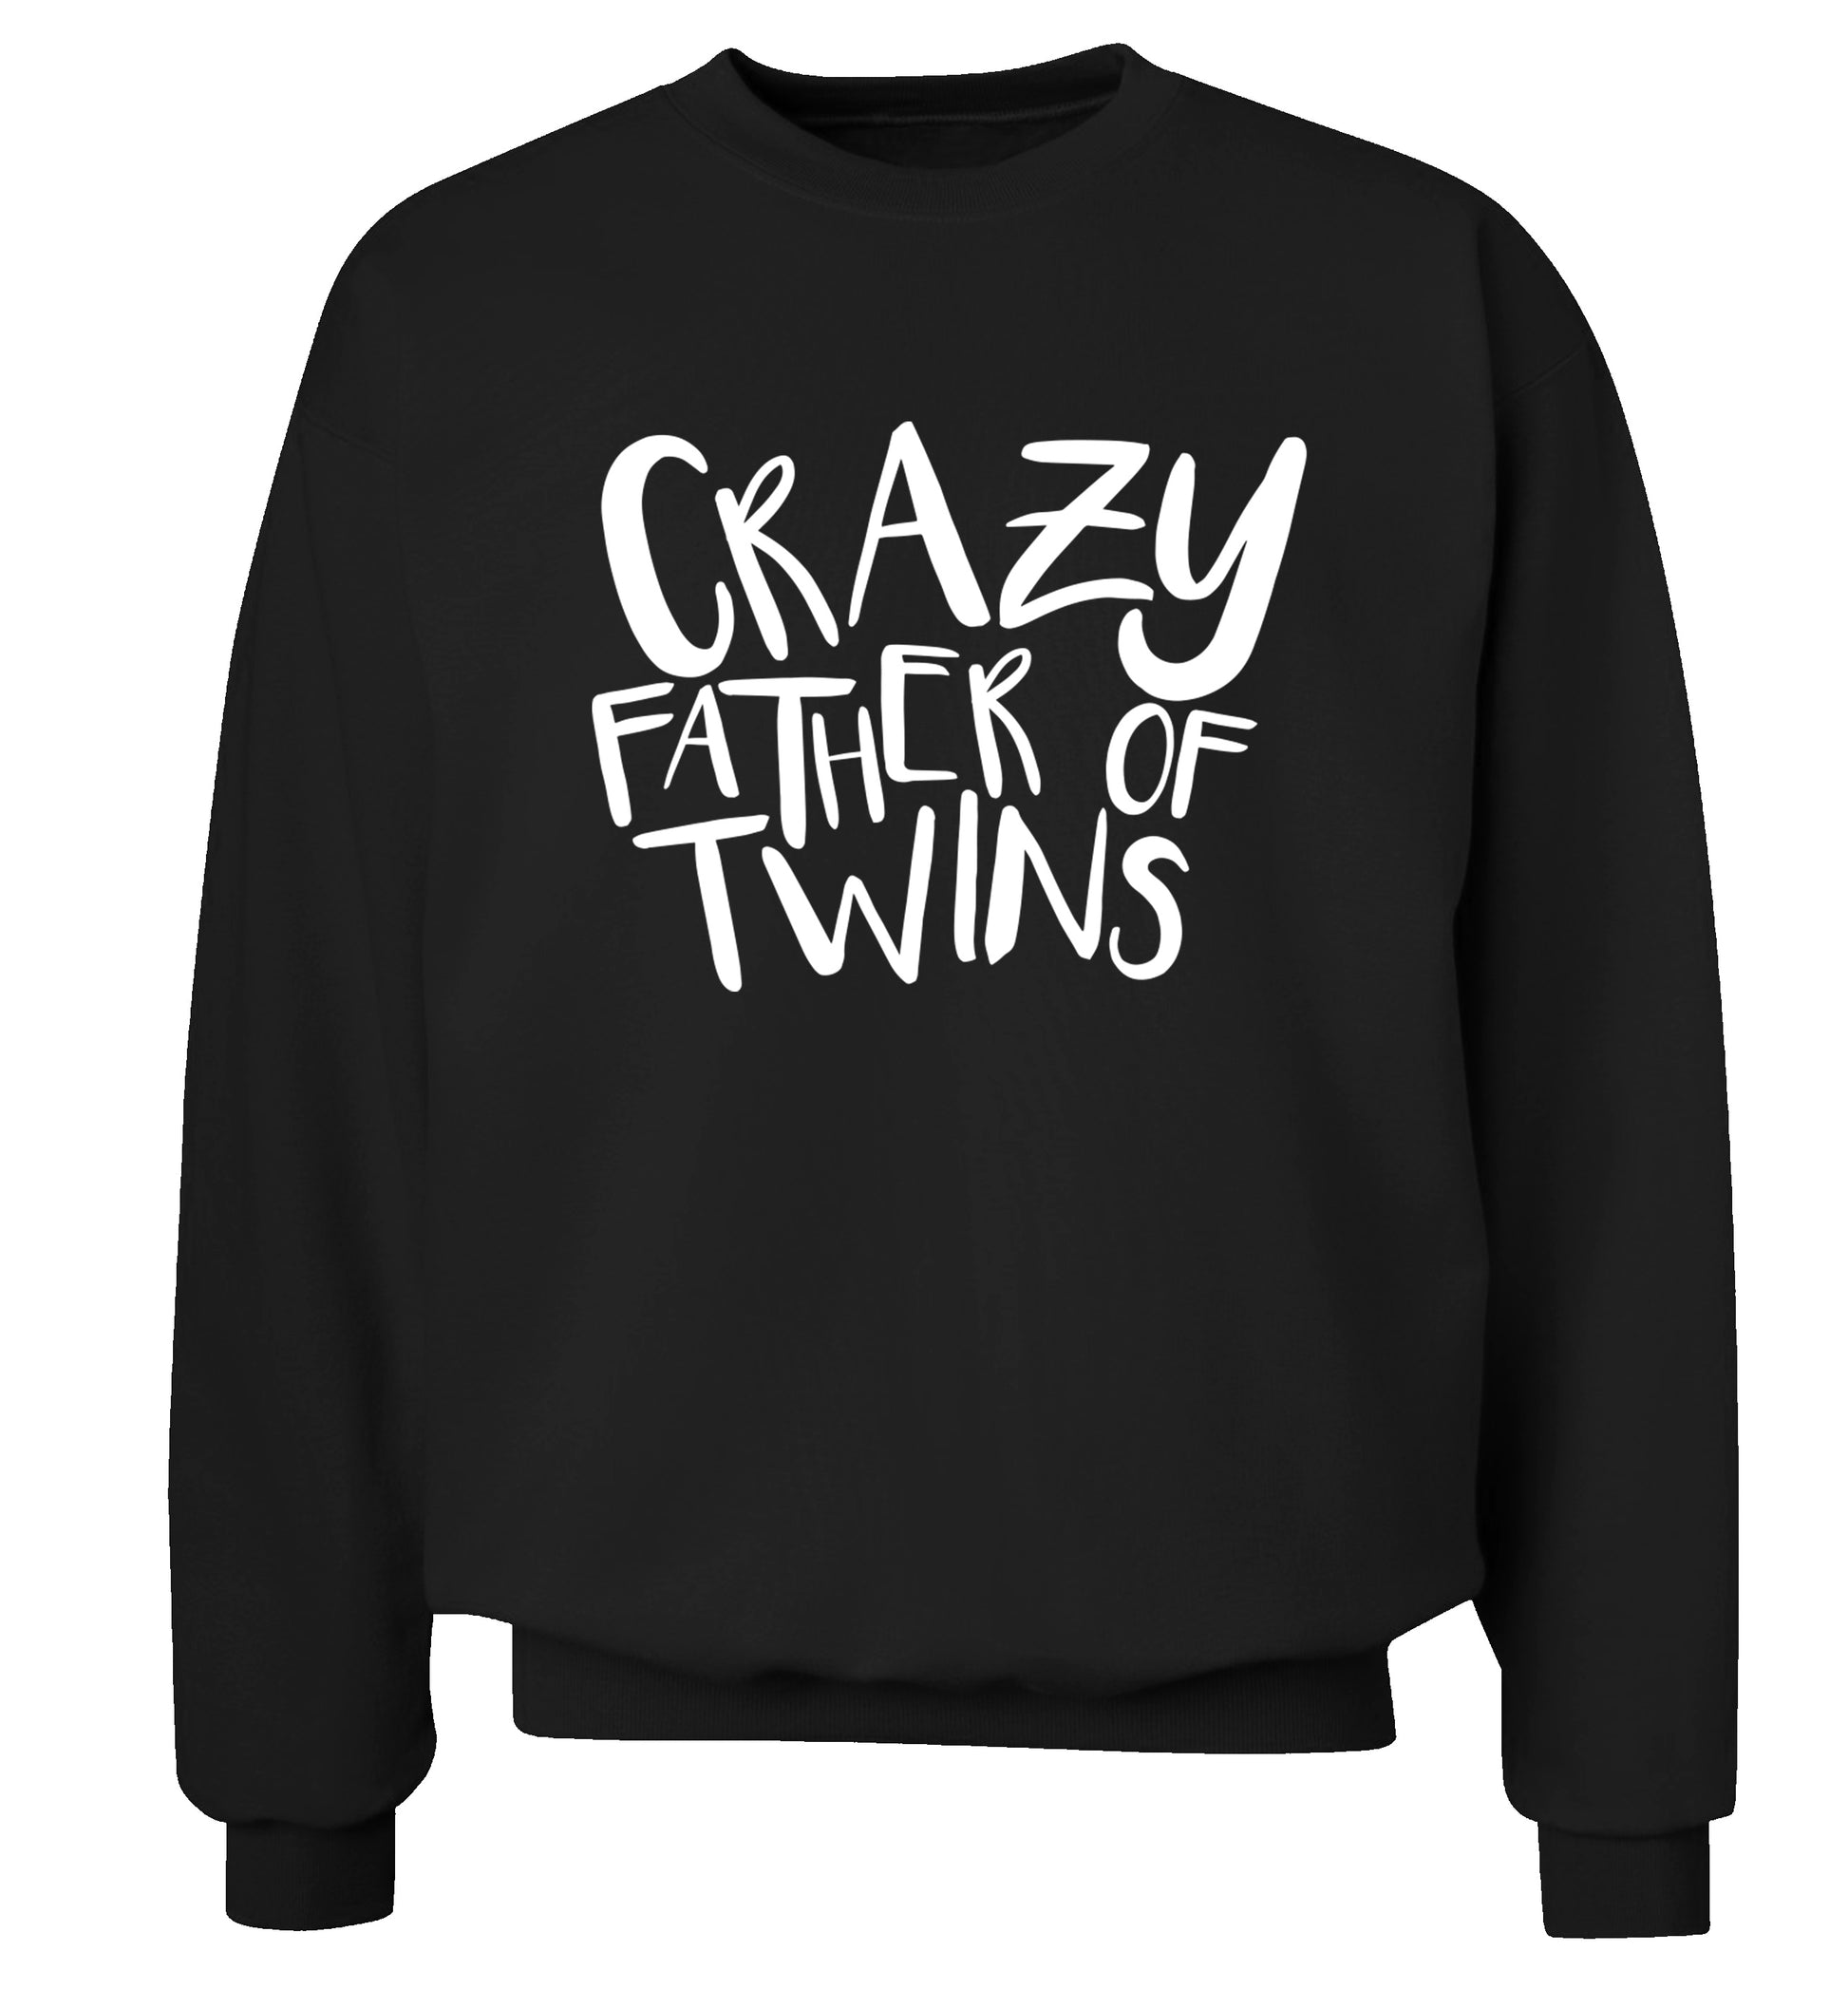 Crazy father of twins Adult's unisex black Sweater 2XL